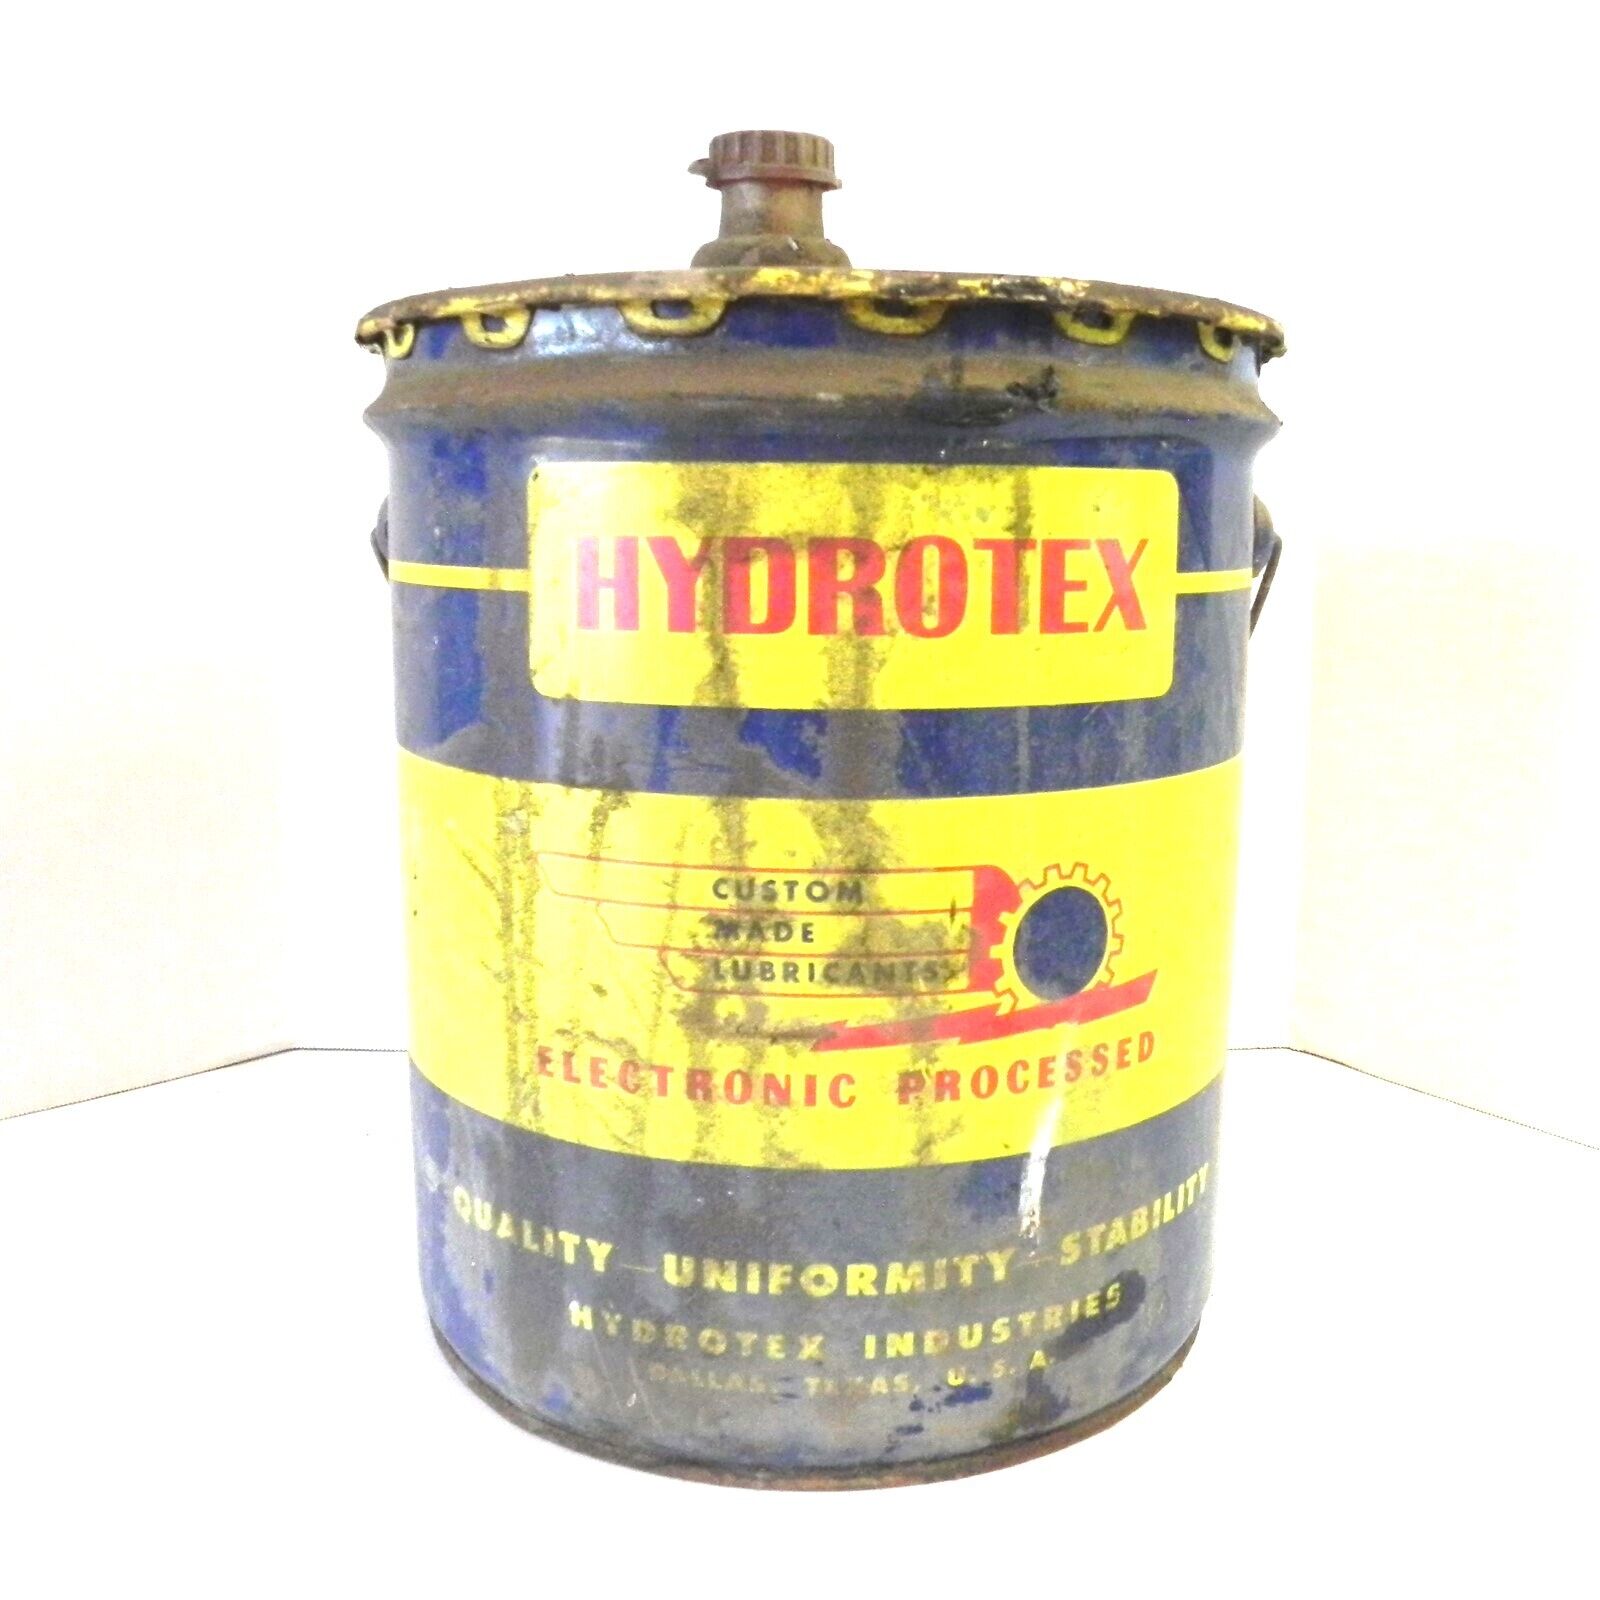 VINTAGE HYDROTEX CUSTOM MADE LUBRICANTS 5 GALLON 35 POUND BUCKET CAN 1/3 FULL